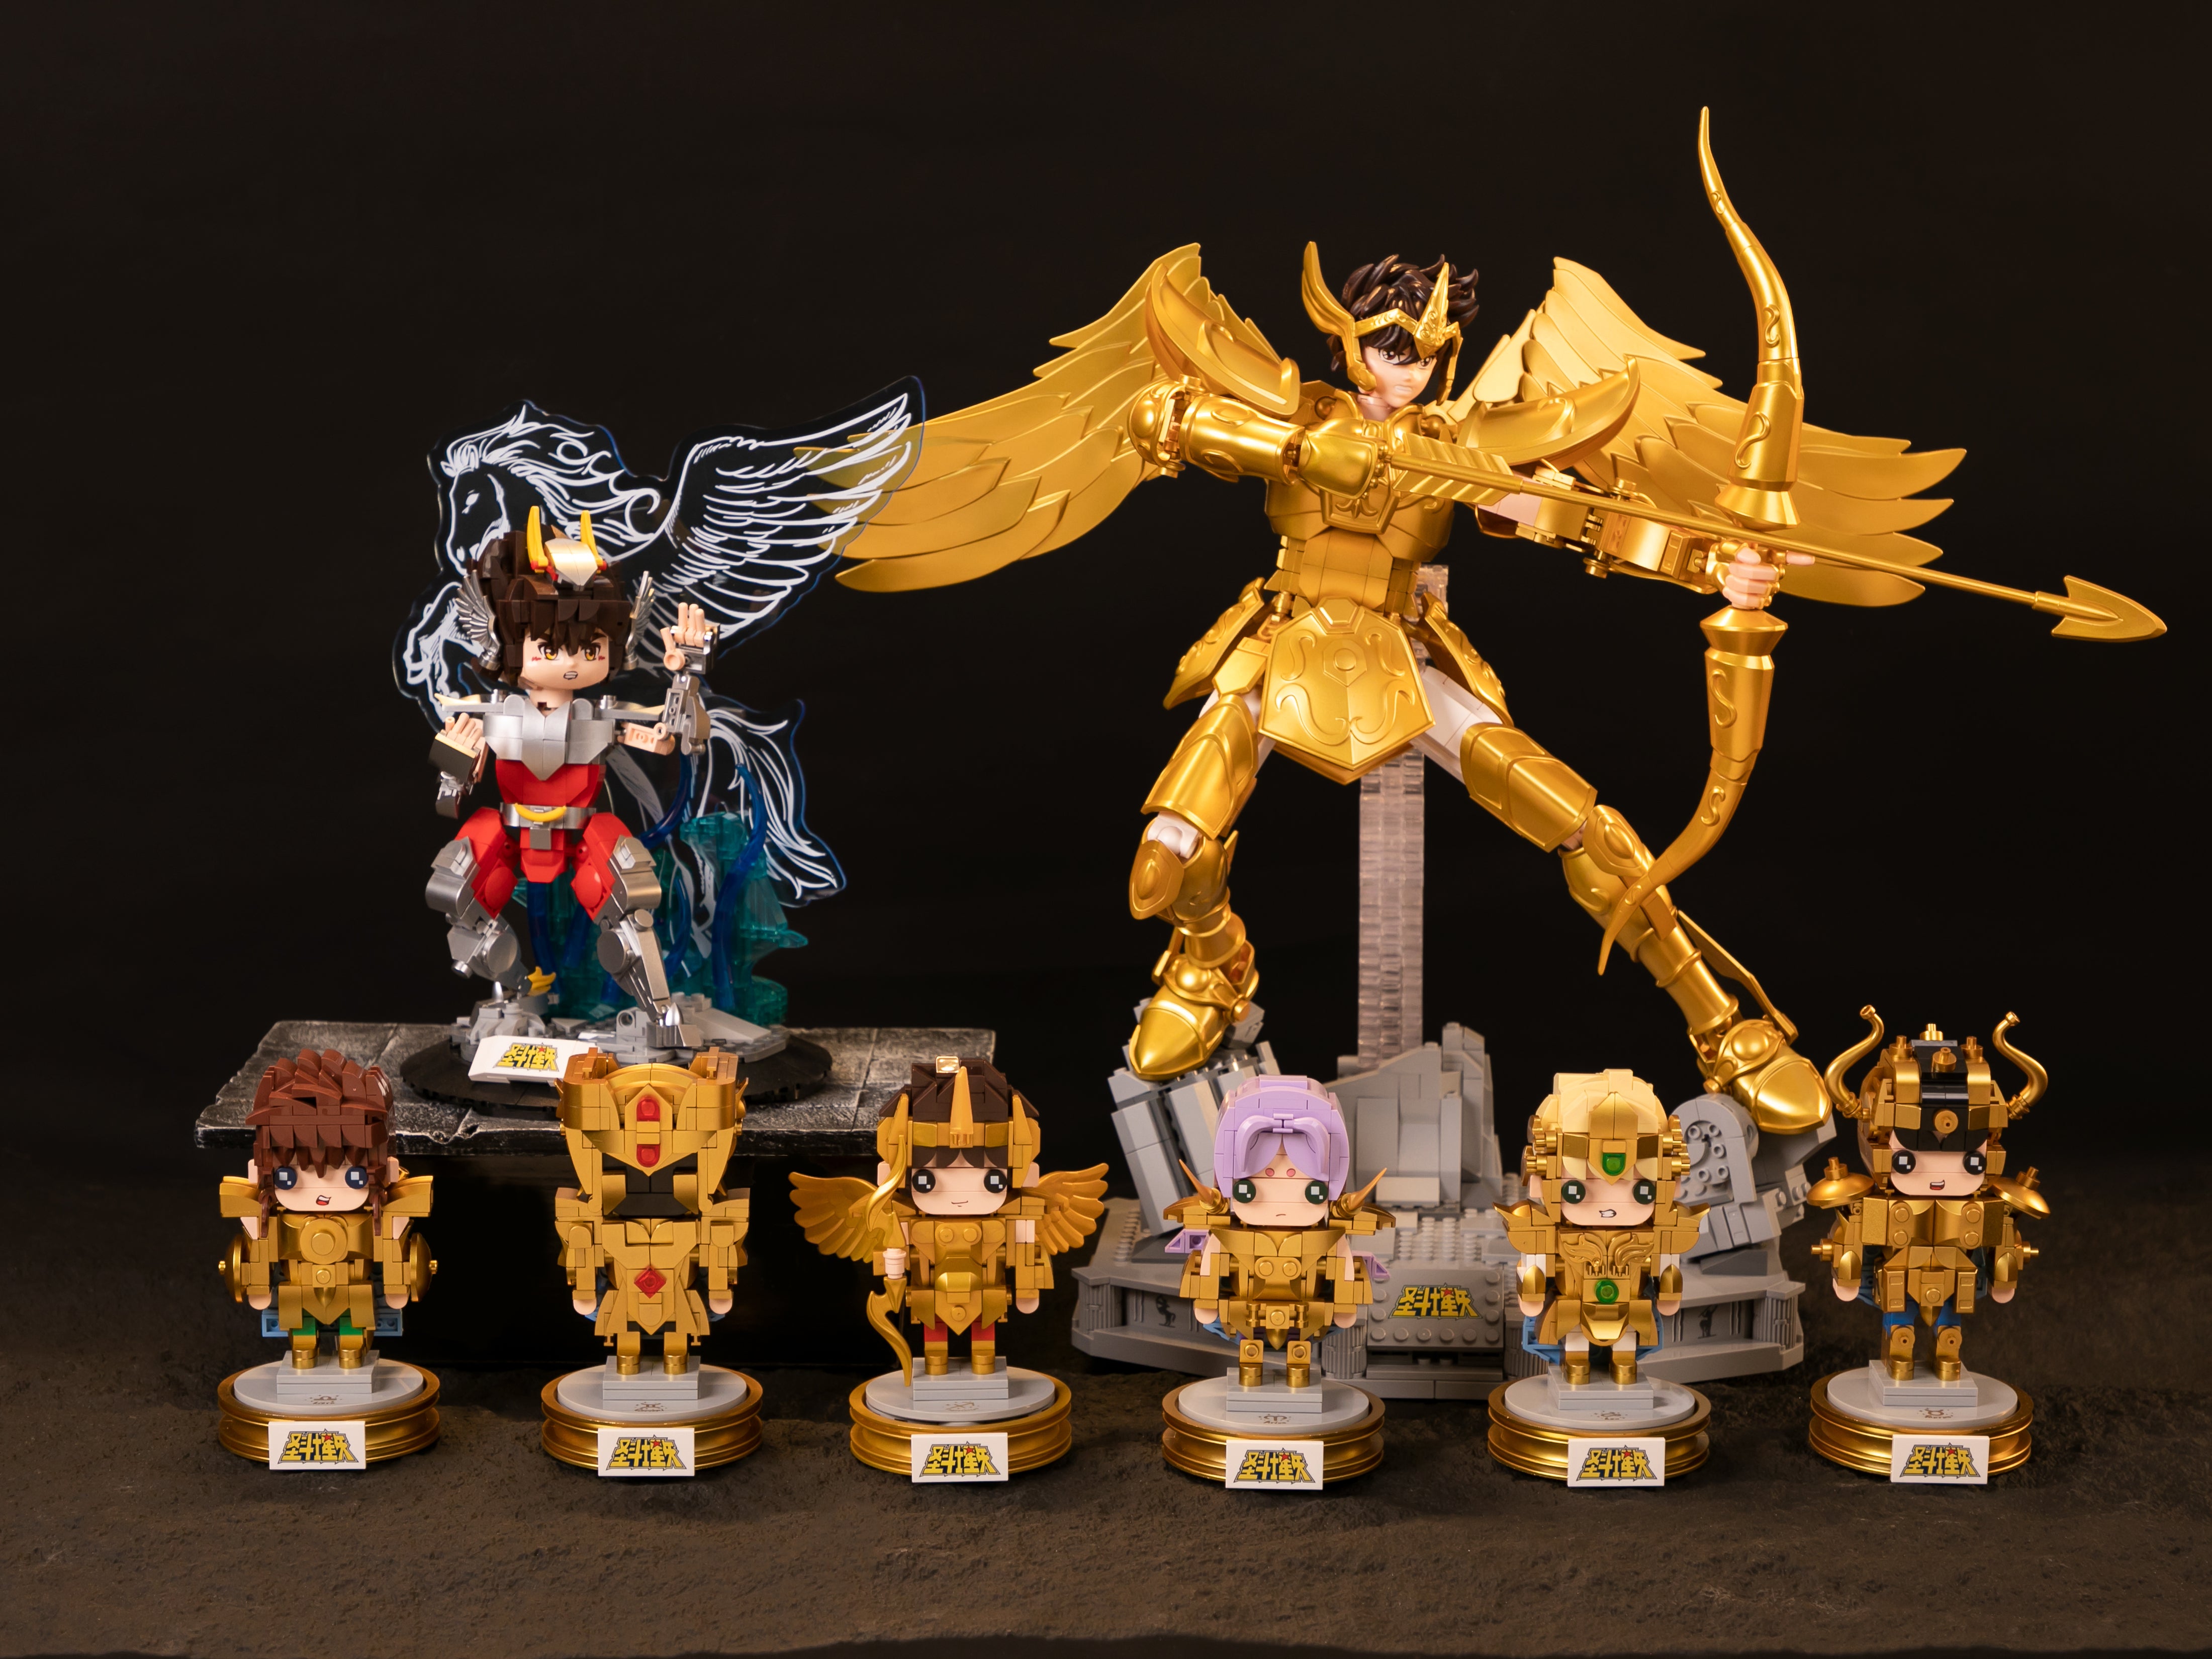 Saint Seiya丨Reimagining the Classic with Craftsmanship, Paying Homage to our Passionate Childhood